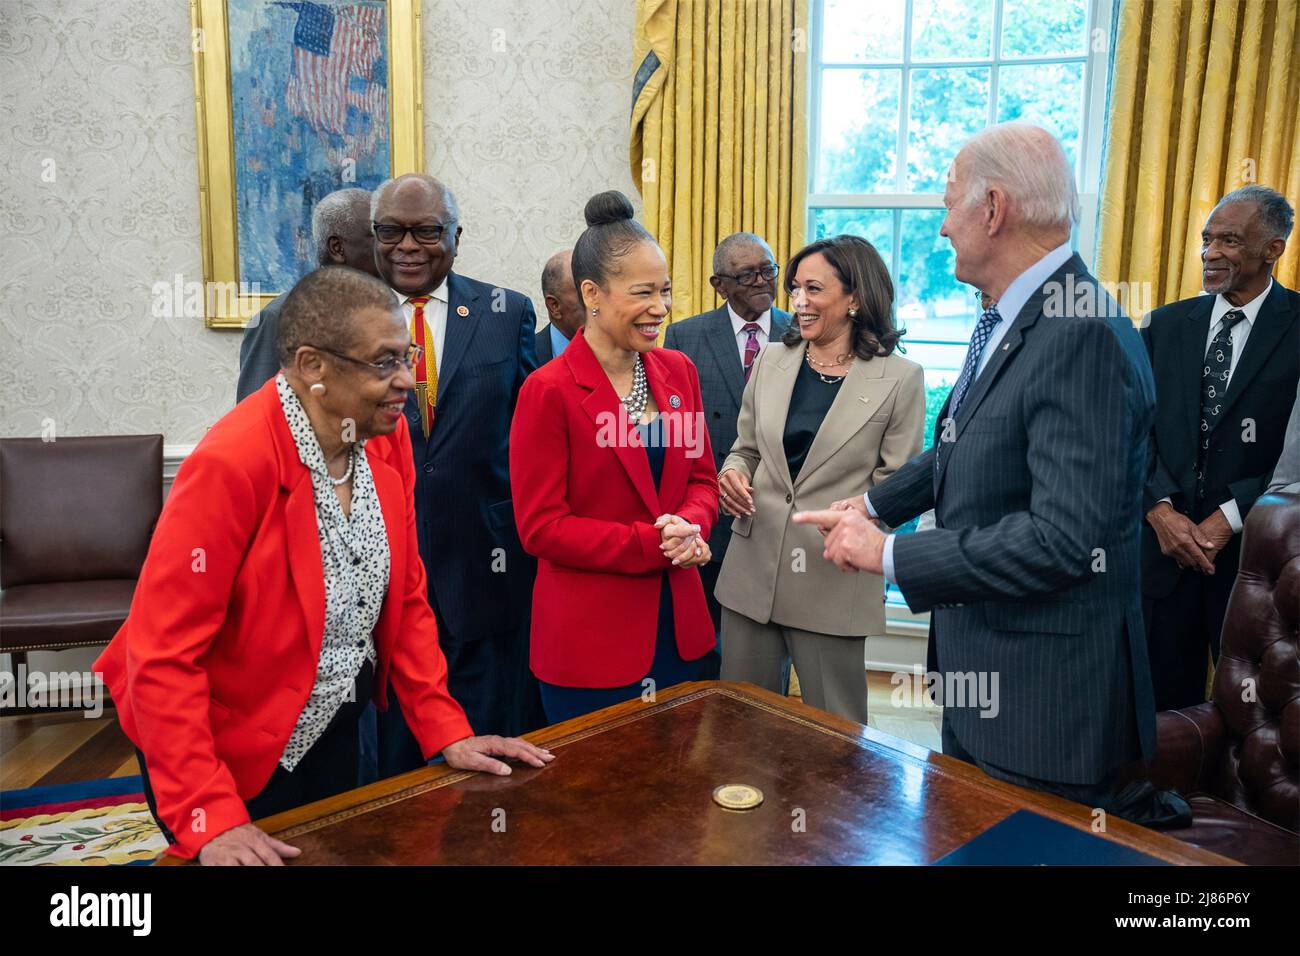 Washington, United States Of America. 13th May, 2022. Washington, United States of America. 13 May, 2022. U.S President Joe Biden, right, chats with Rep. Lisa Blunt Rochester, center, after signing the Brown v. Board of Education National Historical Park Expansion and Redesignation Act into law, in the Oval Office of the White House, May 12, 2022 in Washington, DC Also in the picture are Rep. Eleanor Holmes Norton, left, Rep. James Clyburn and Vice President Kamala Harris. Credit: Adam Schultz/White House Photo/Alamy Live News Stock Photo